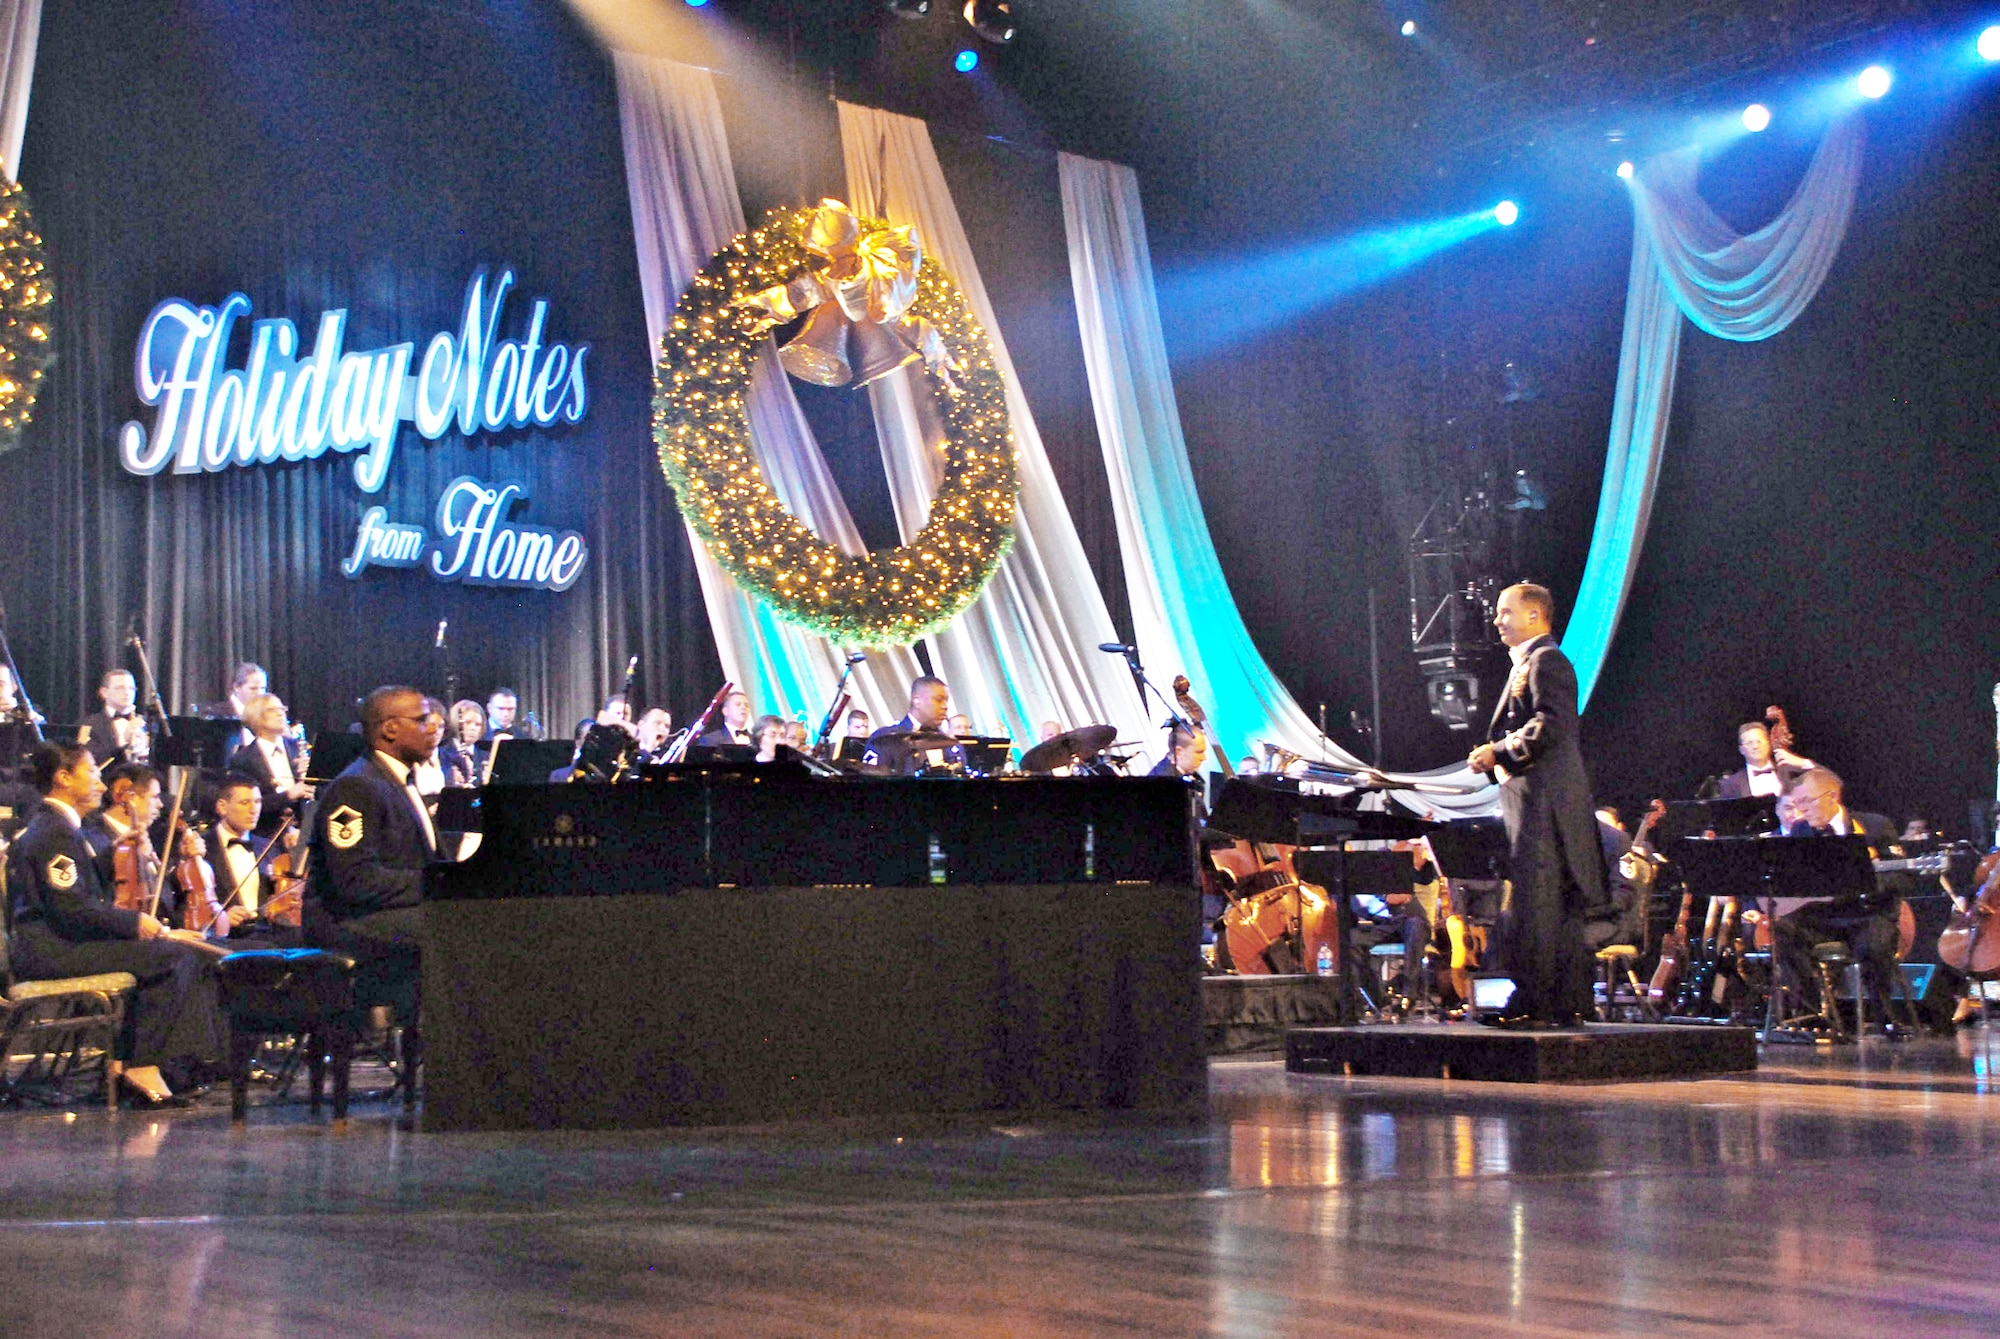 Maj. Donald Schofield leads the 60-member orchestra during the 2009 Holiday Notes from Home taped concert Oct. 26, 2009, at the Grand Ole Opry House in Nashville, Tenn. The annual holiday concert, featuring Amy Grant, Brian McKnight, Take 6, Band of the Air Force Reserve and Air Force Strings ensemble, will broadcast on Gospel Music Channel and American Forces Network. Major Schofield is the Band of the Air Force Reserve commander. (U.S. Air Force/Ken Hackman)